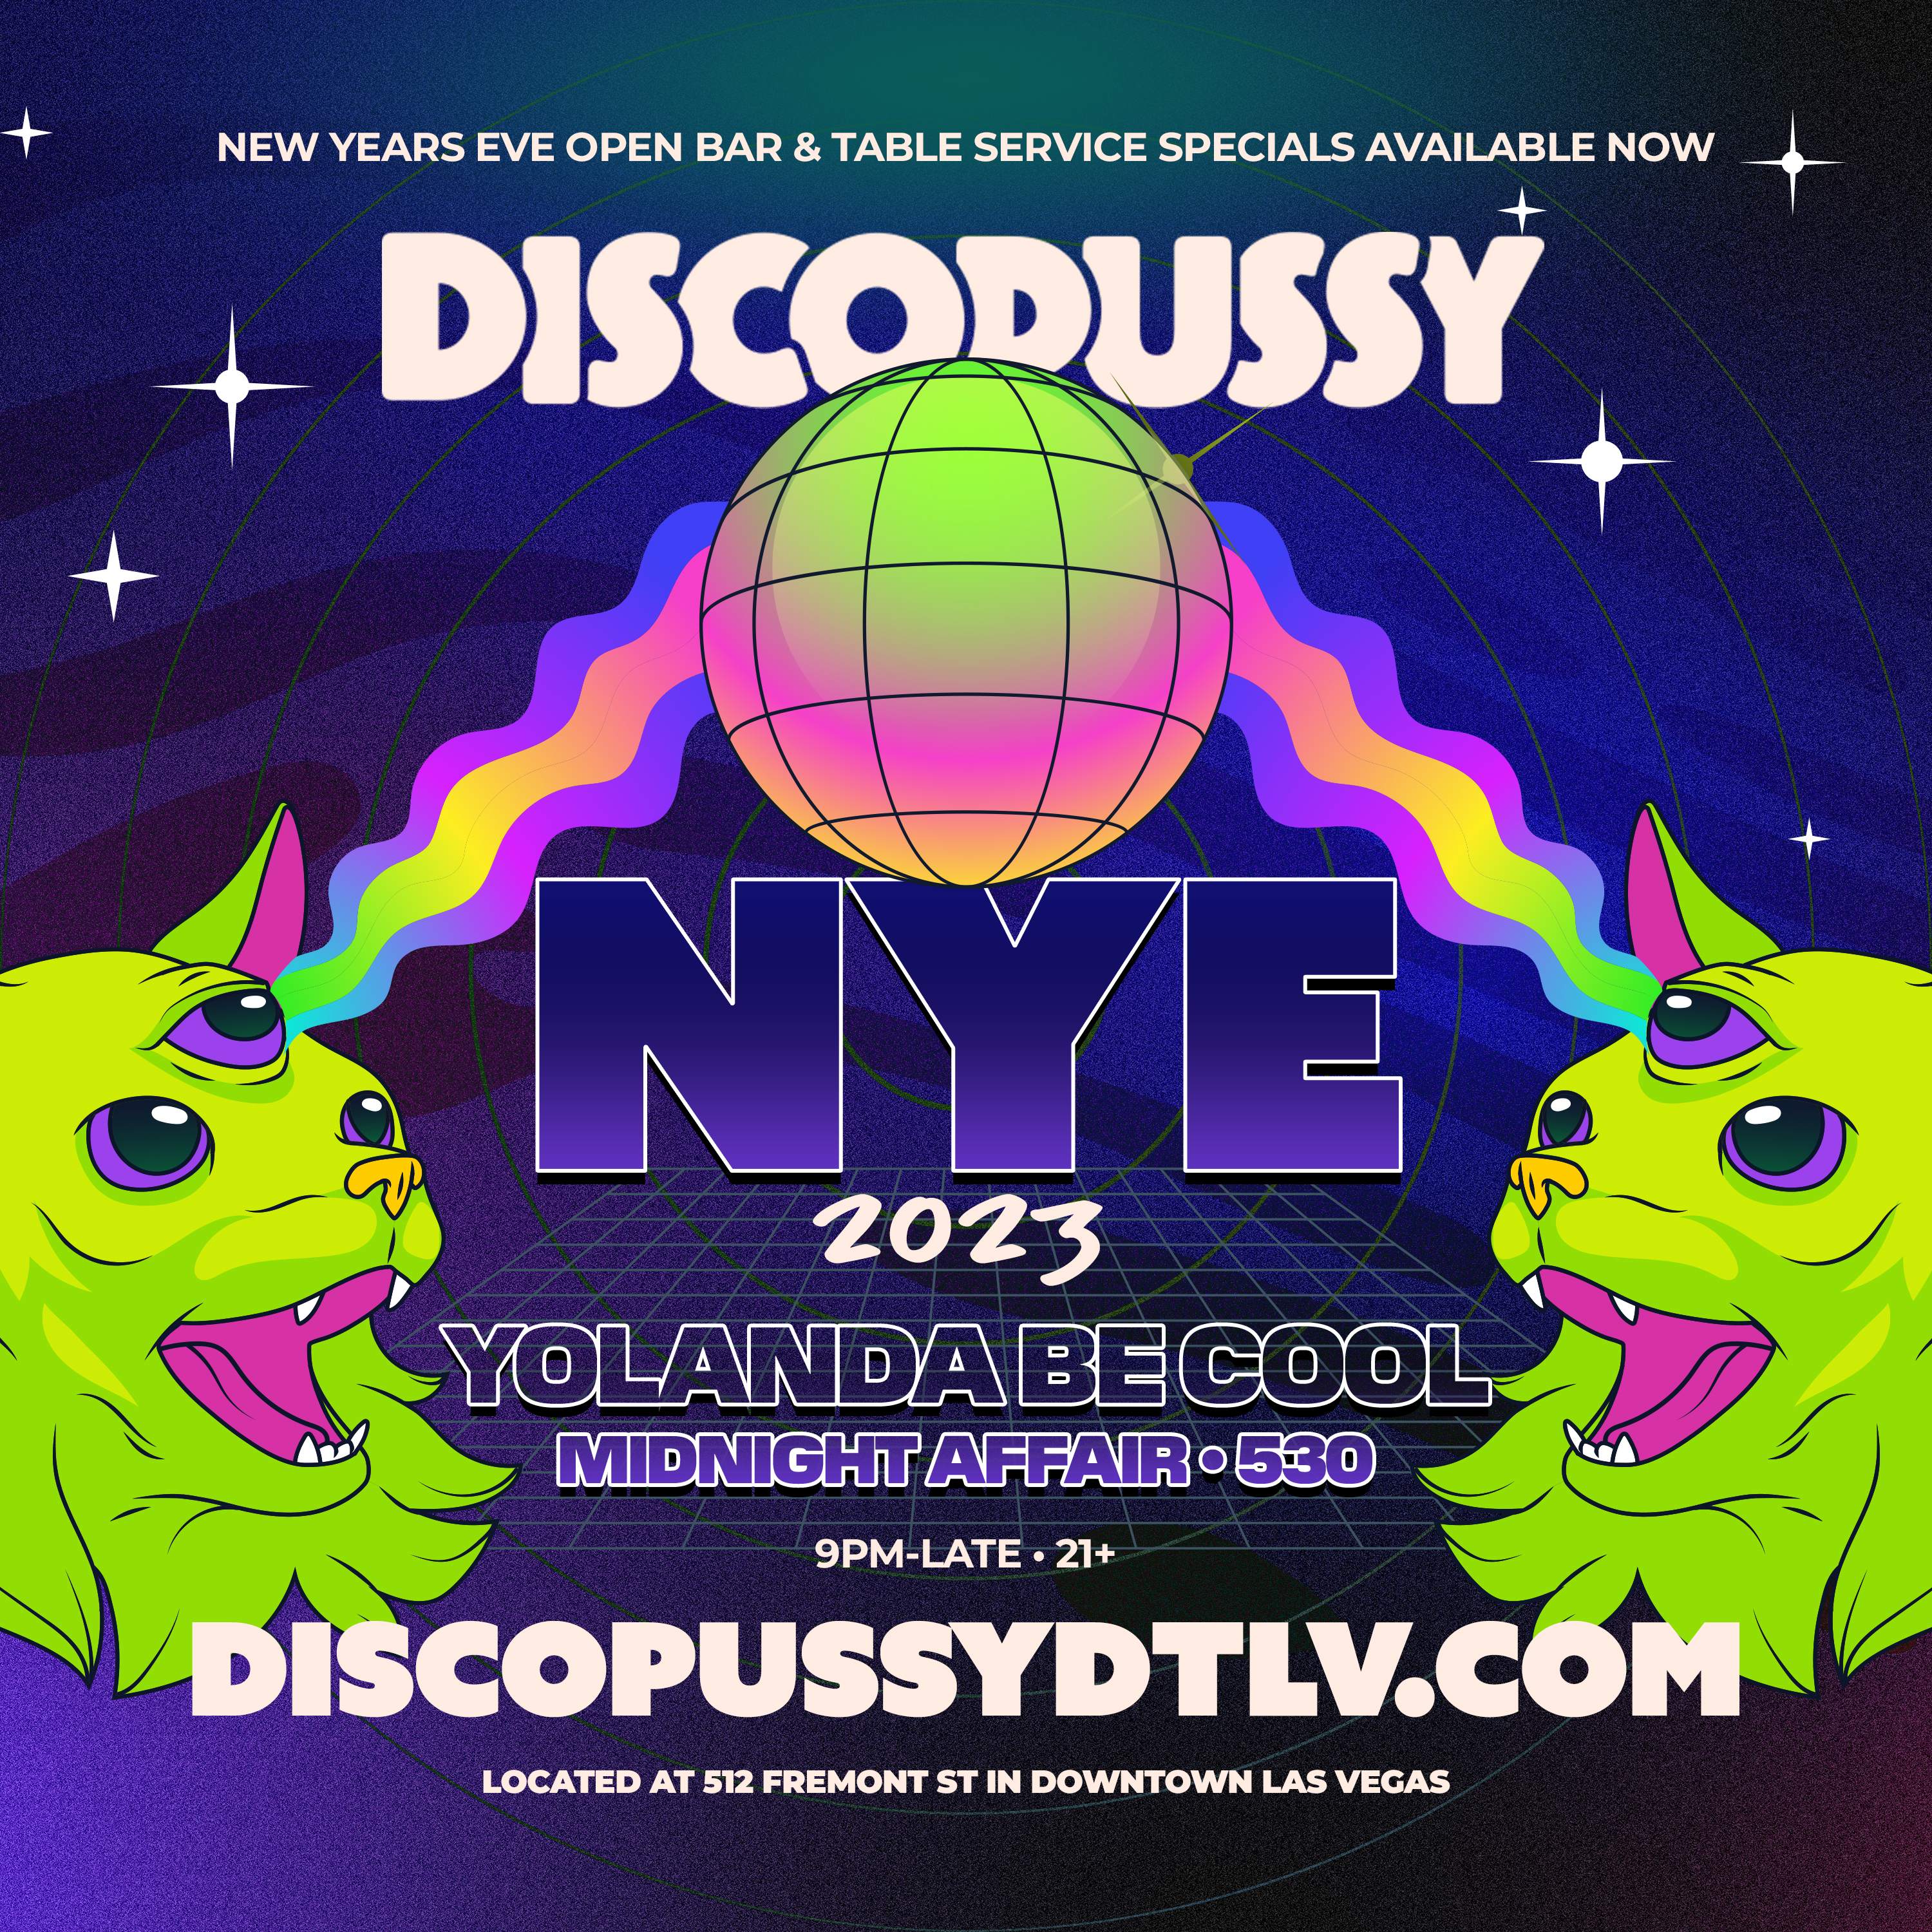 Discopussy NYE 2023 with Yolanda Be Cool - フライヤー表